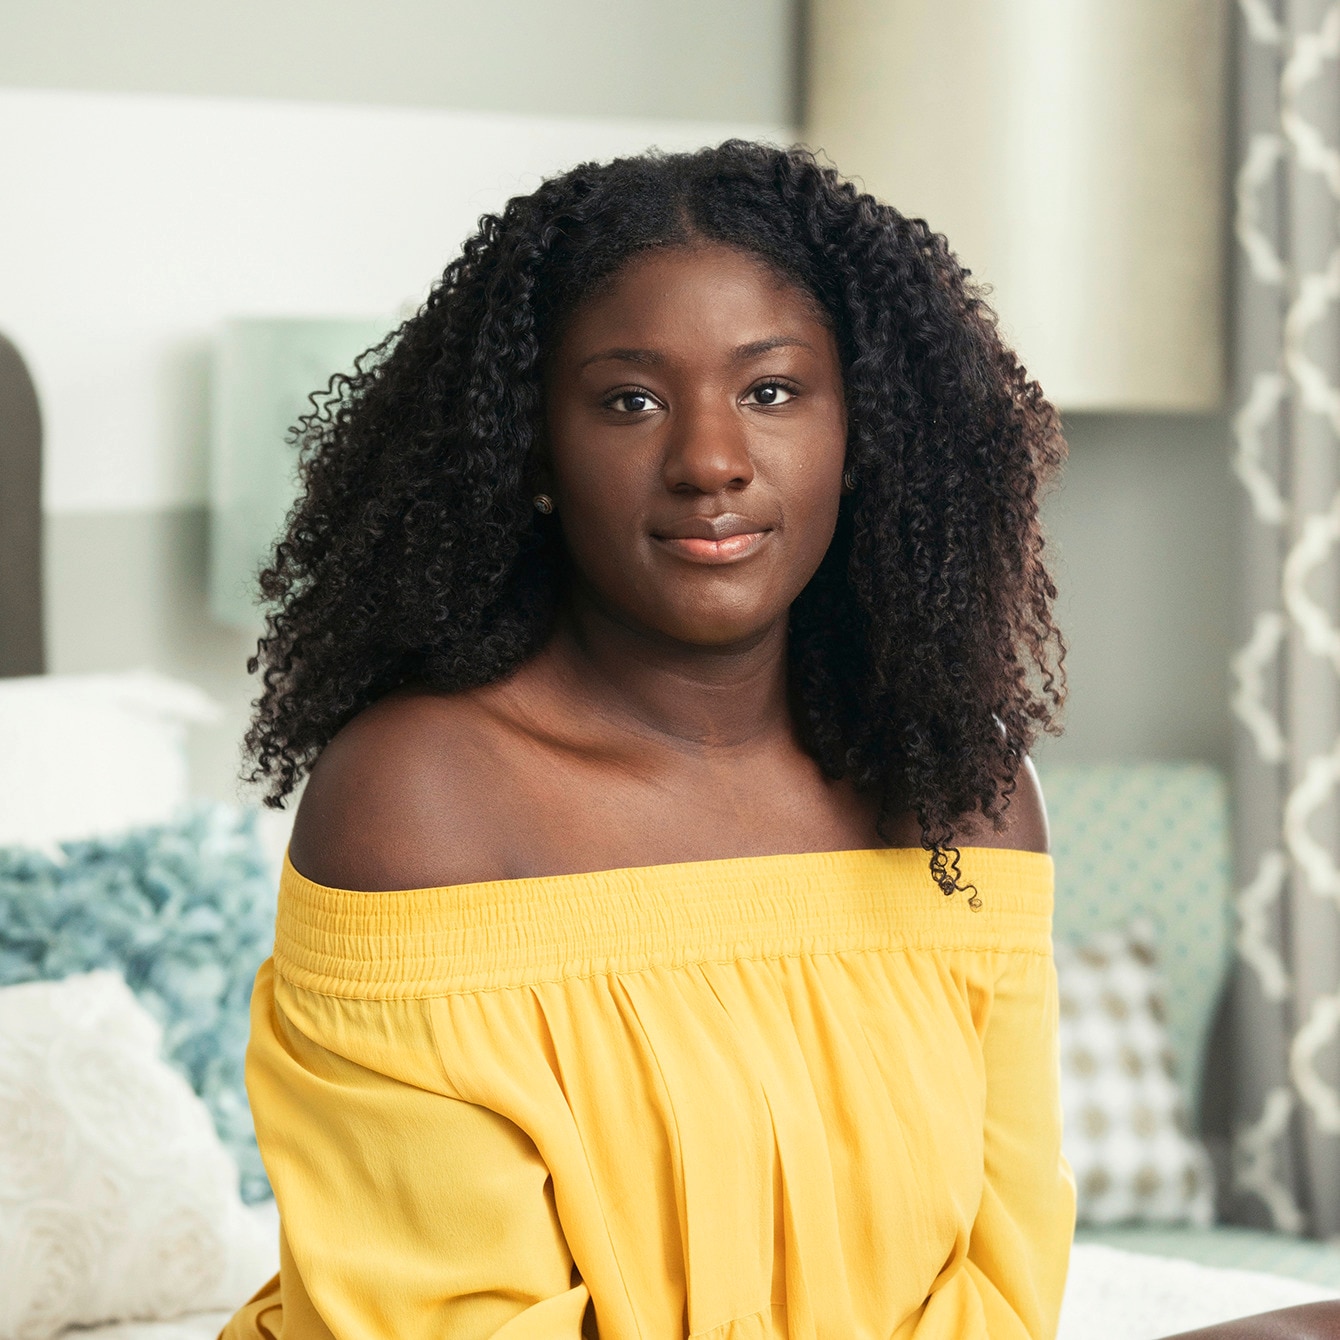 Dove Inspire others to embrace their natural hair image